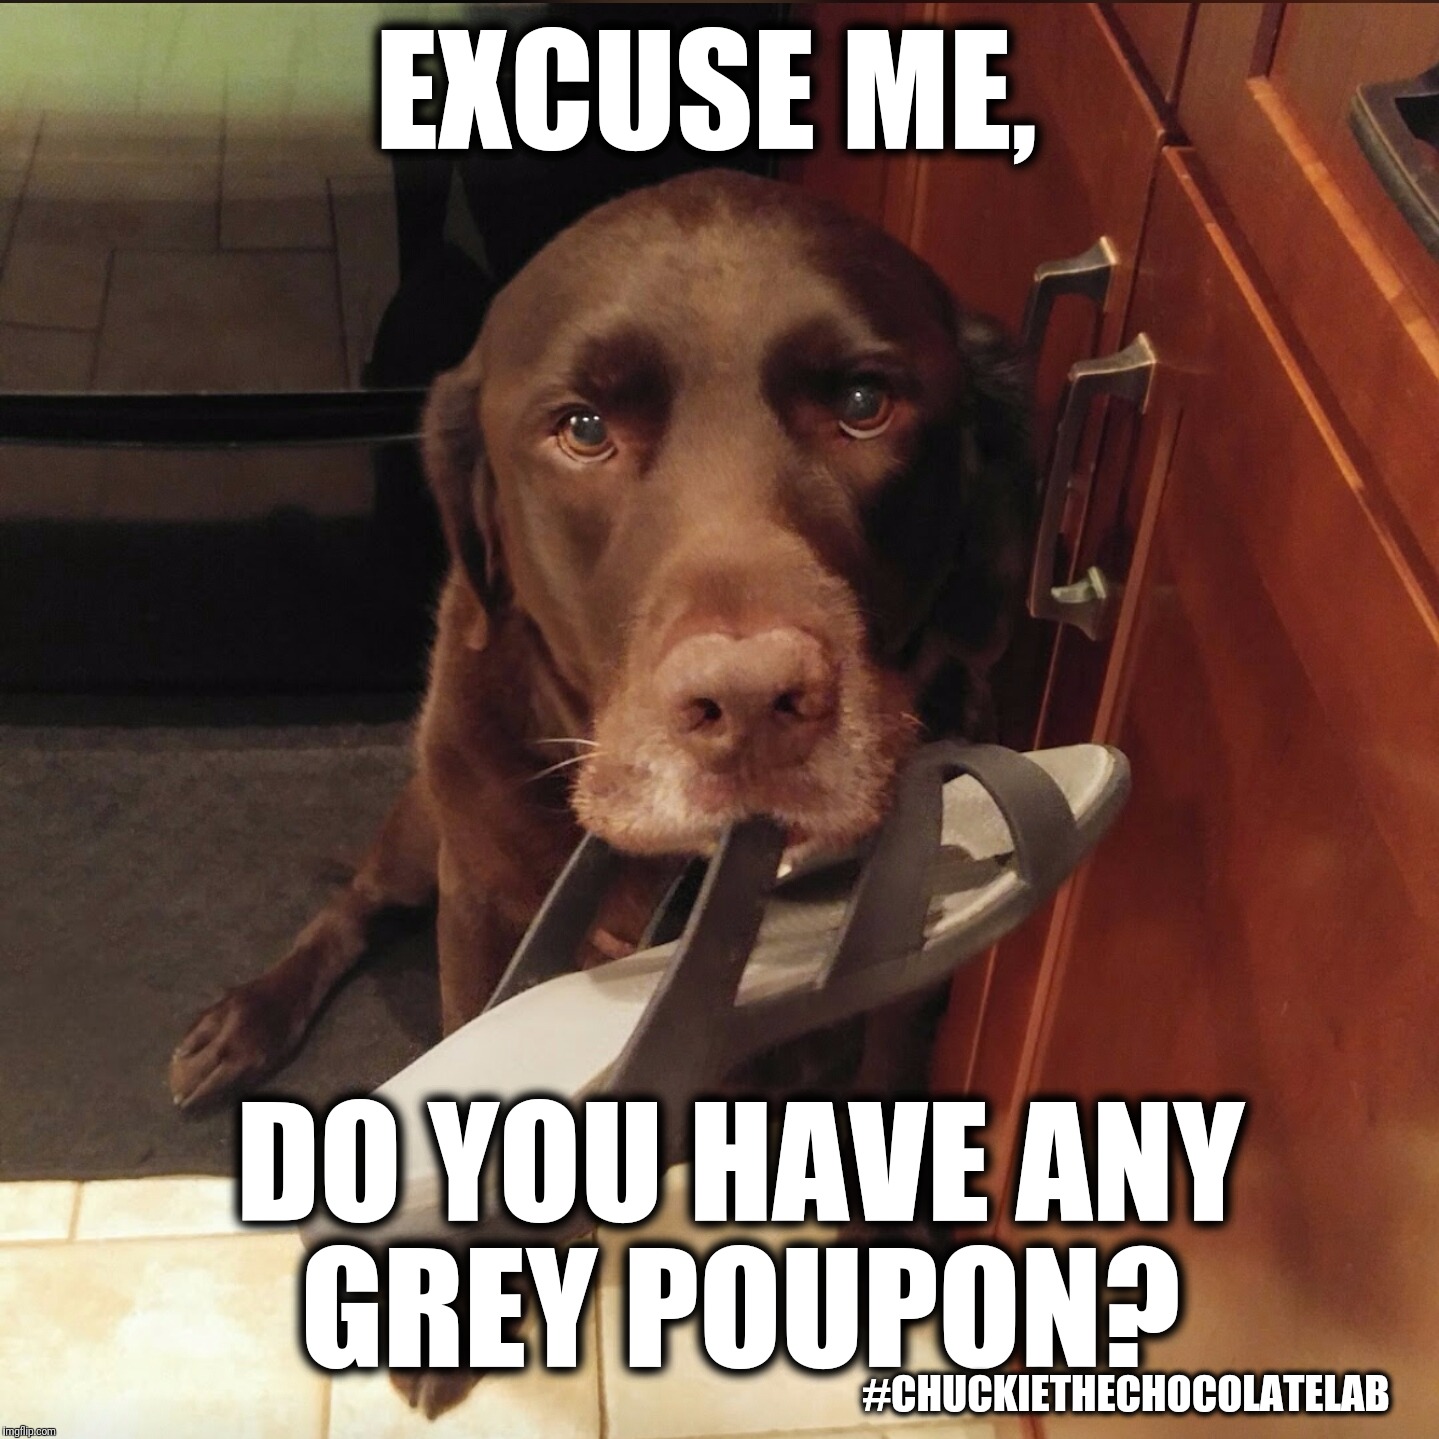 Excuse me, do you have any grey poupon?  | EXCUSE ME, DO YOU HAVE ANY GREY POUPON? #CHUCKIETHECHOCOLATELAB | image tagged in chuckie the chocolate lab,grey poupon,excuse me,funny,dogs,memes | made w/ Imgflip meme maker